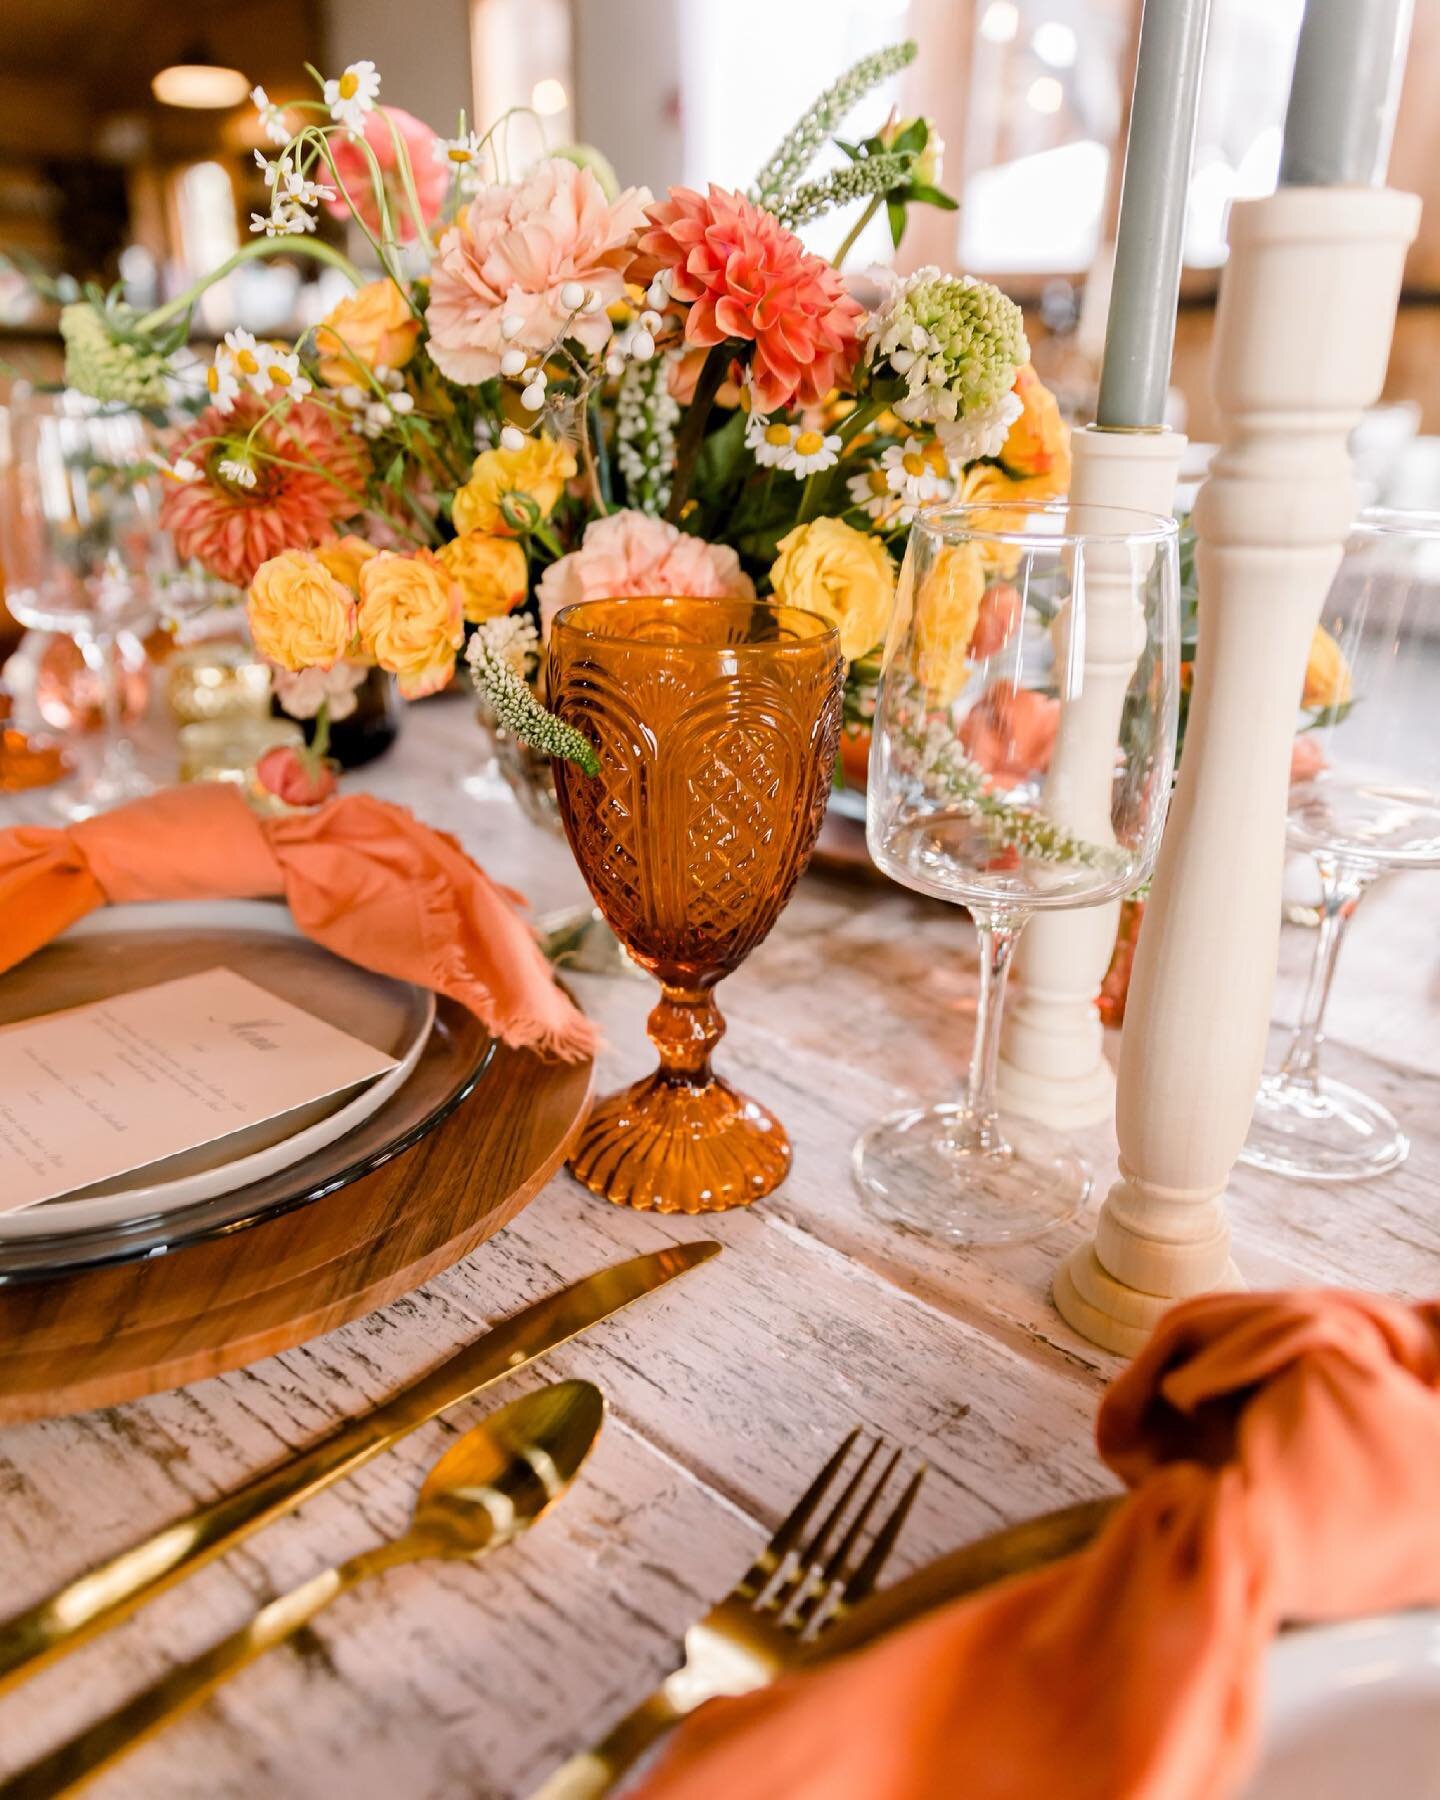 What do you have in mind for your wedding aesthetic? We are living for these warm colors with our new amber glasses and natural wooden candlestick holders 😍

Floral: @tenpointfloraldesign 
Design/Rentals: @arrowedbeginnings &amp; @whiteoaksdahlonega